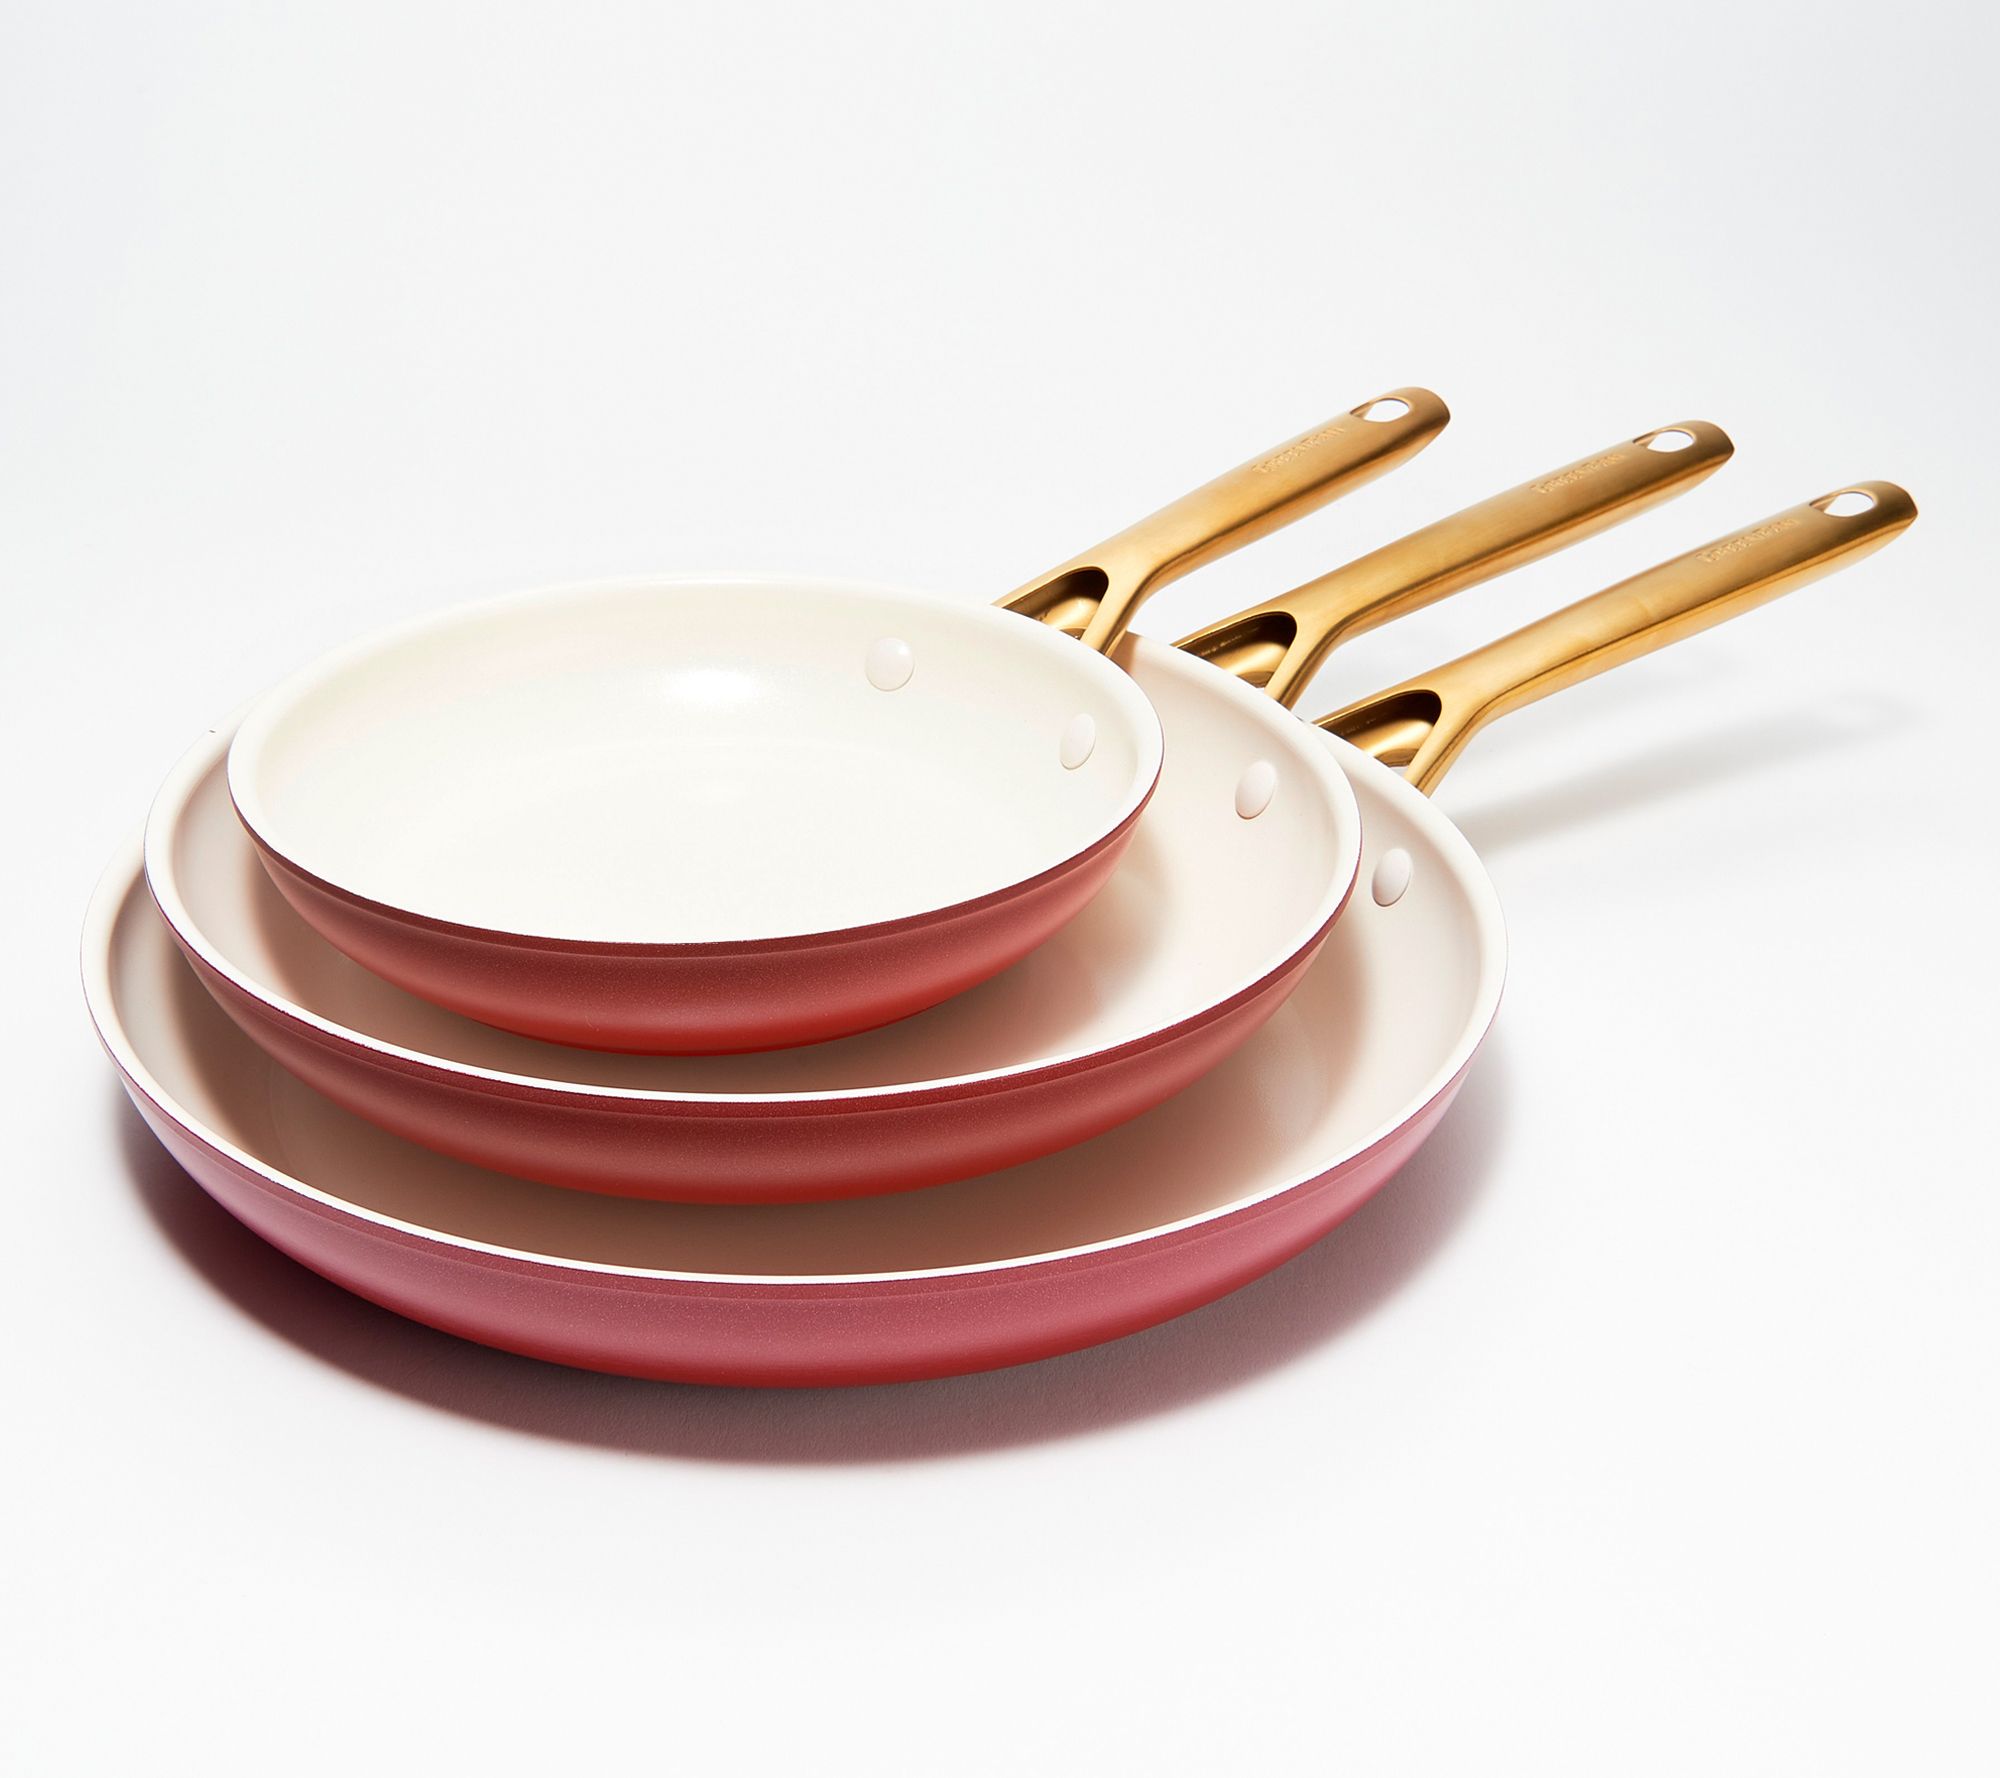 GreenPan's Diamond-Infused Cookware Set: Stunning New Colors